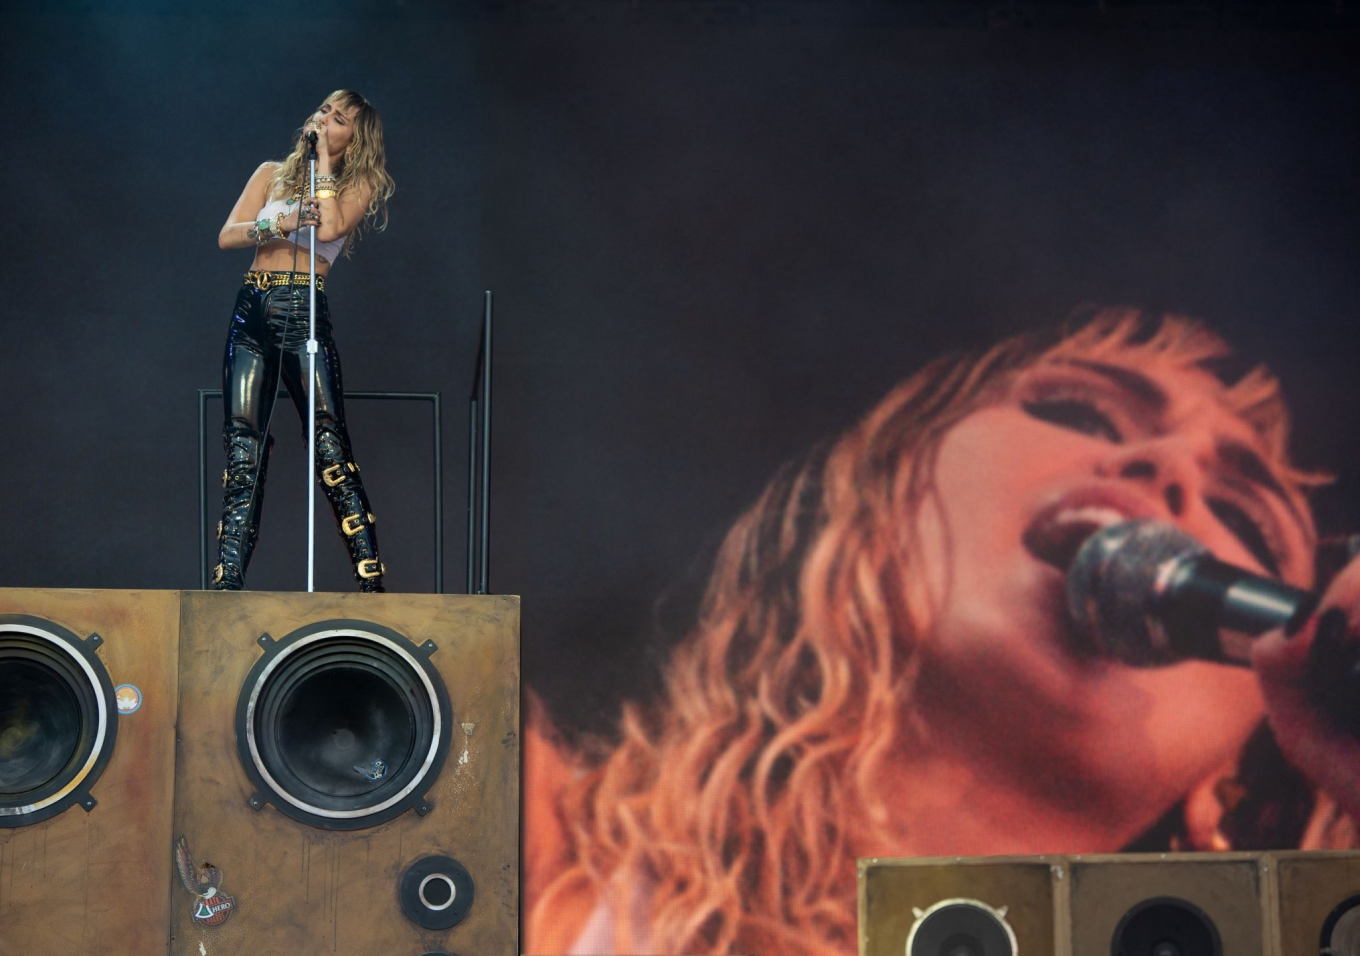 Miley Cyrus â€“ Performing on the Pyramid Stage at Glastonbury Festival in Somerset